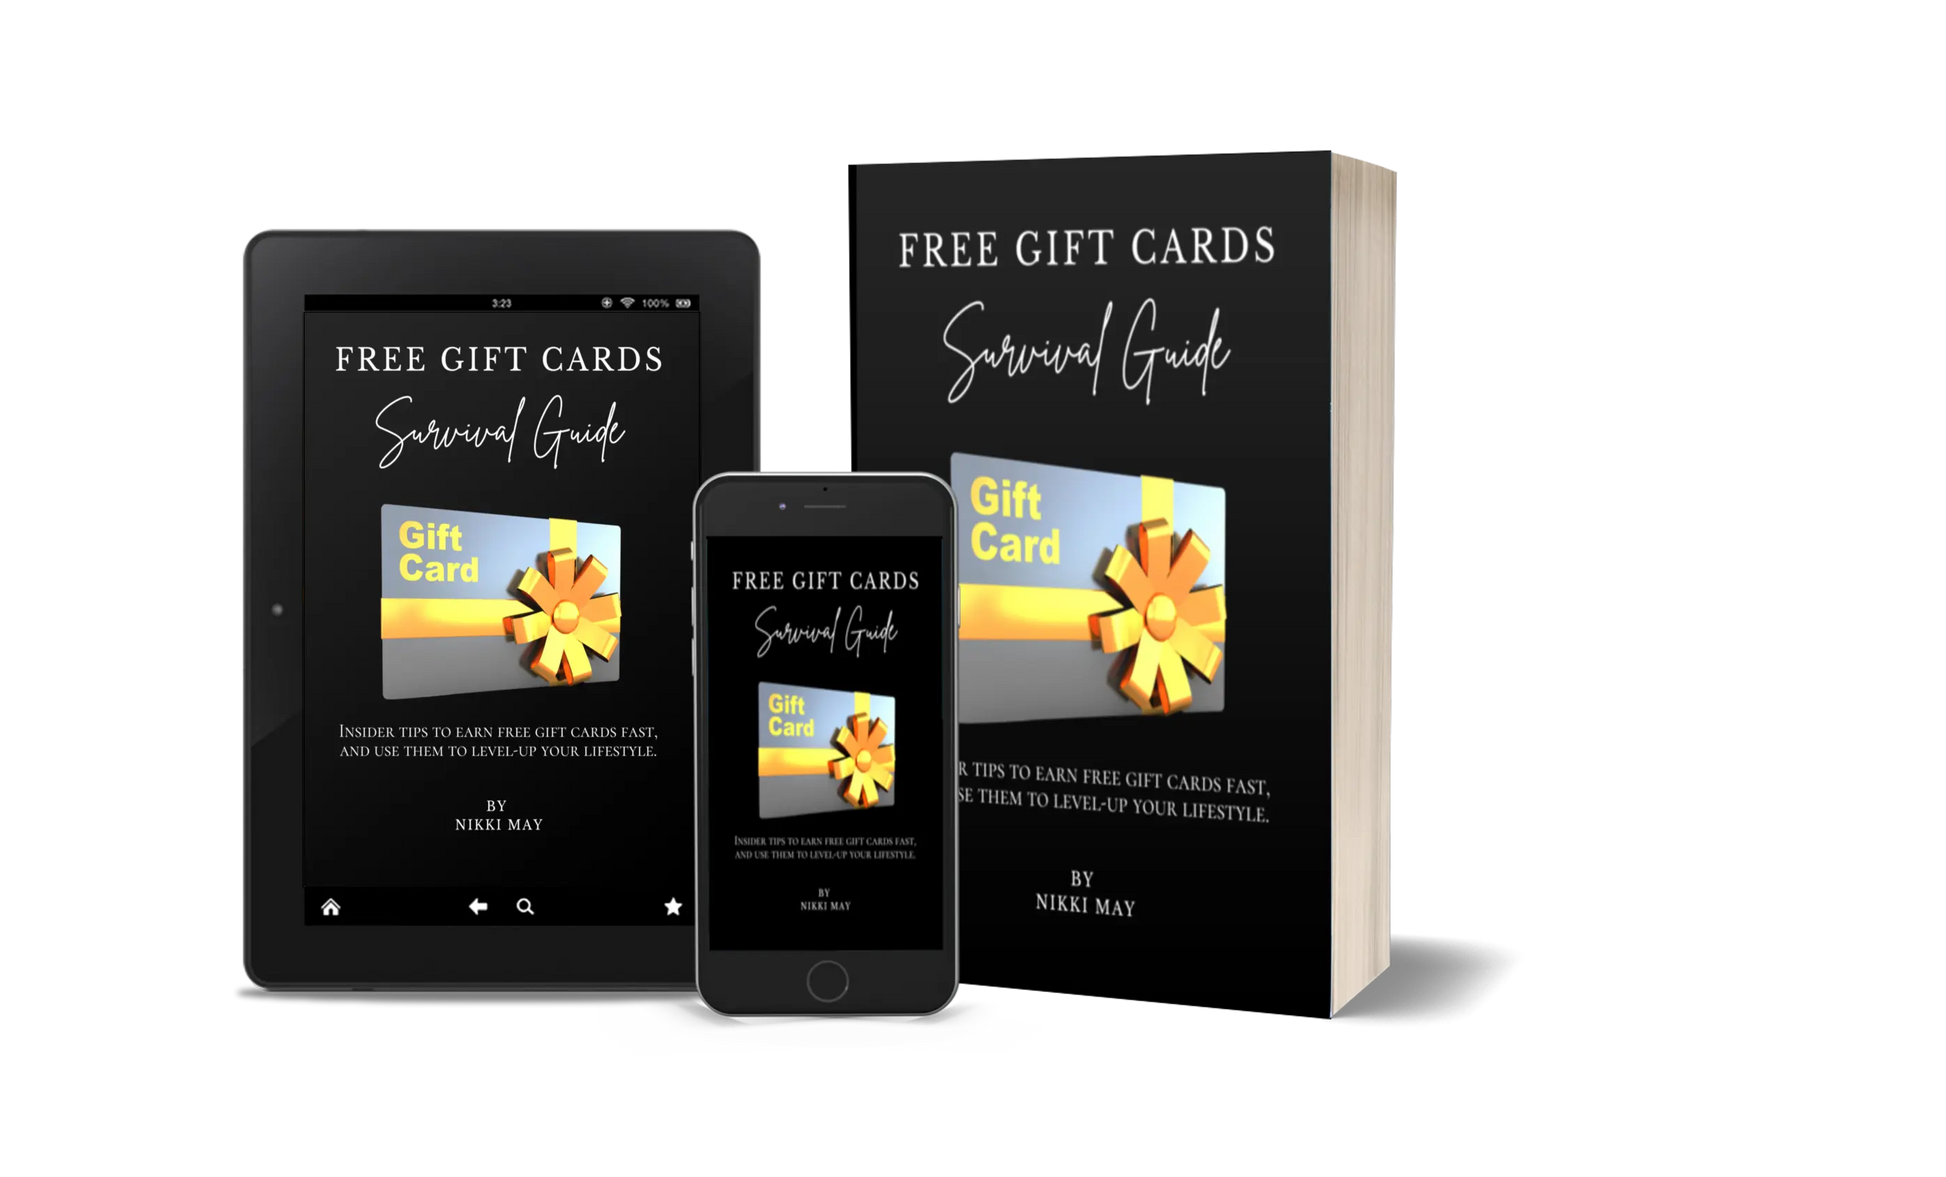 Free Gift Cards Survival Guide Nikki Connected Toolkit